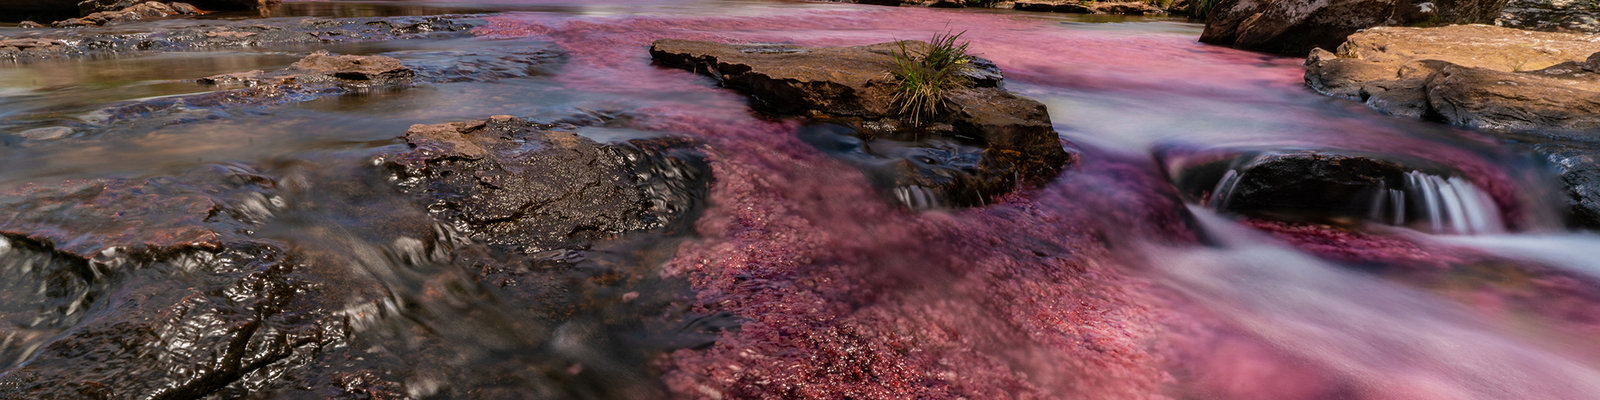 The colorful algae growing in the riverbed makes the water looks red. At the banks, there is a lush jungle.